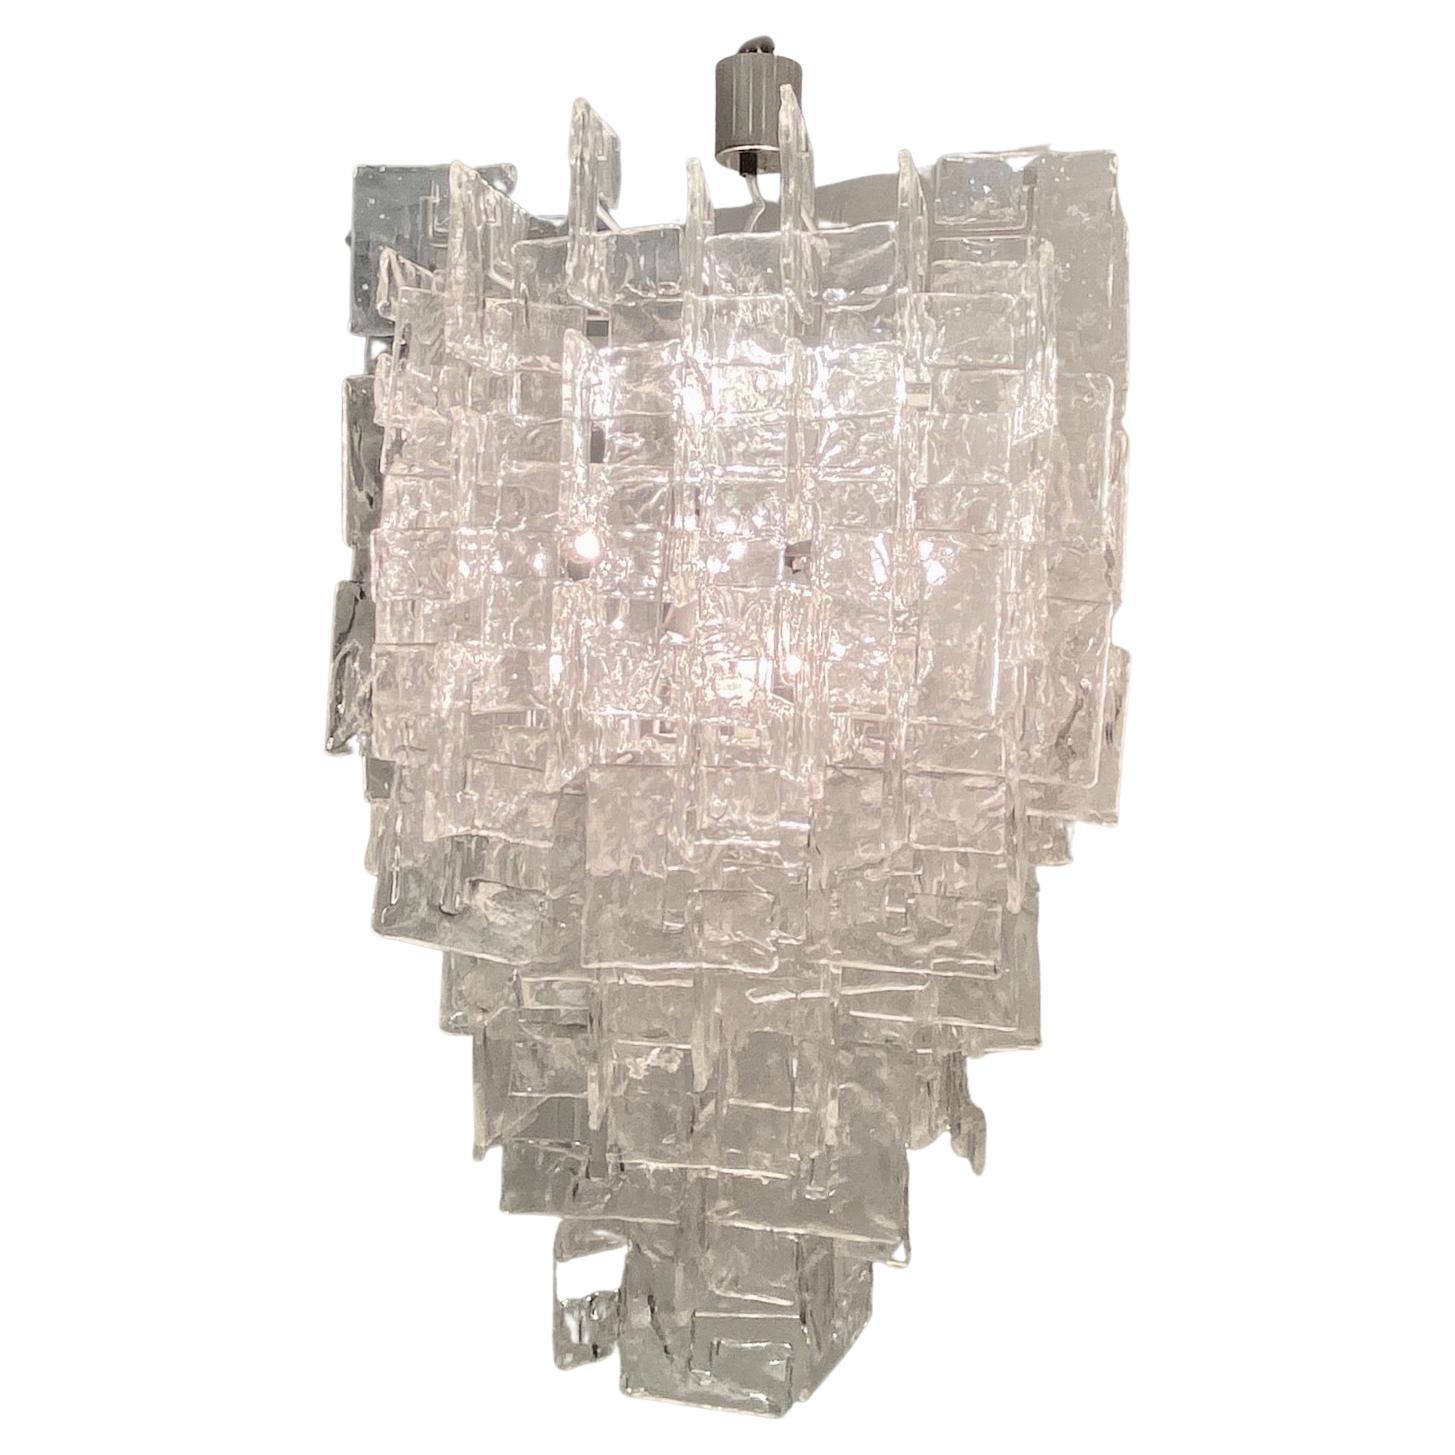 This is quite a large elegant 12 bulbs original 1960's classic tiered Murano chandelier with around 180 C shaped transparent Mazzega Murano interlocking glass elements by Carlo Nason, all original from the 60's/70's (with the original smaller size